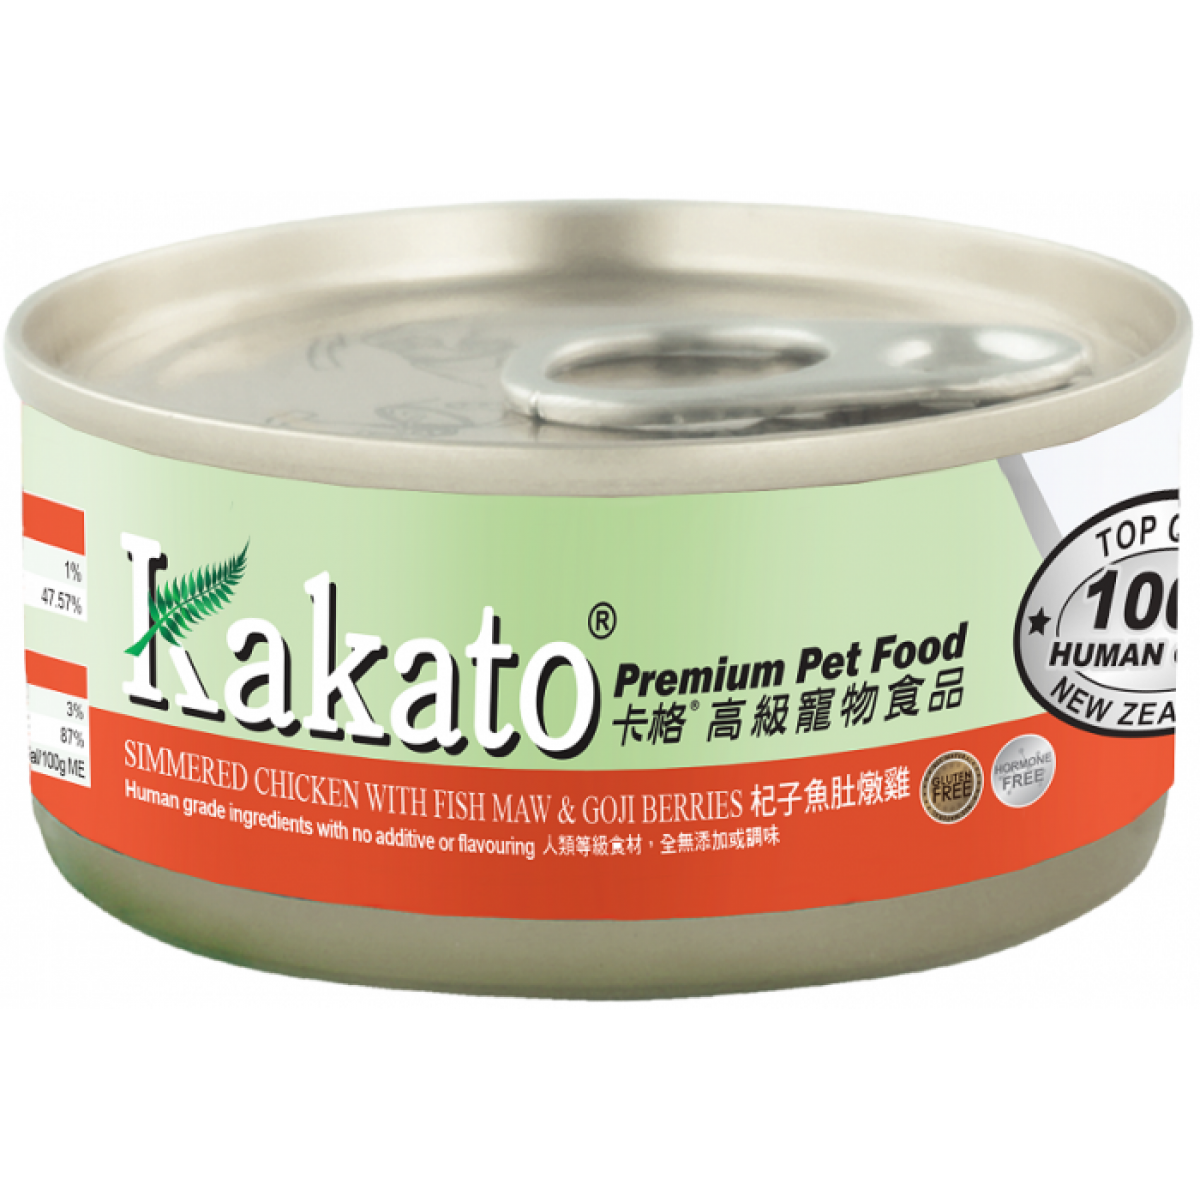 Kakato - Simmered Chicken with Fish Maw & Goji Berries (Suitable for Cats & Dogs) Canned from Vetopia